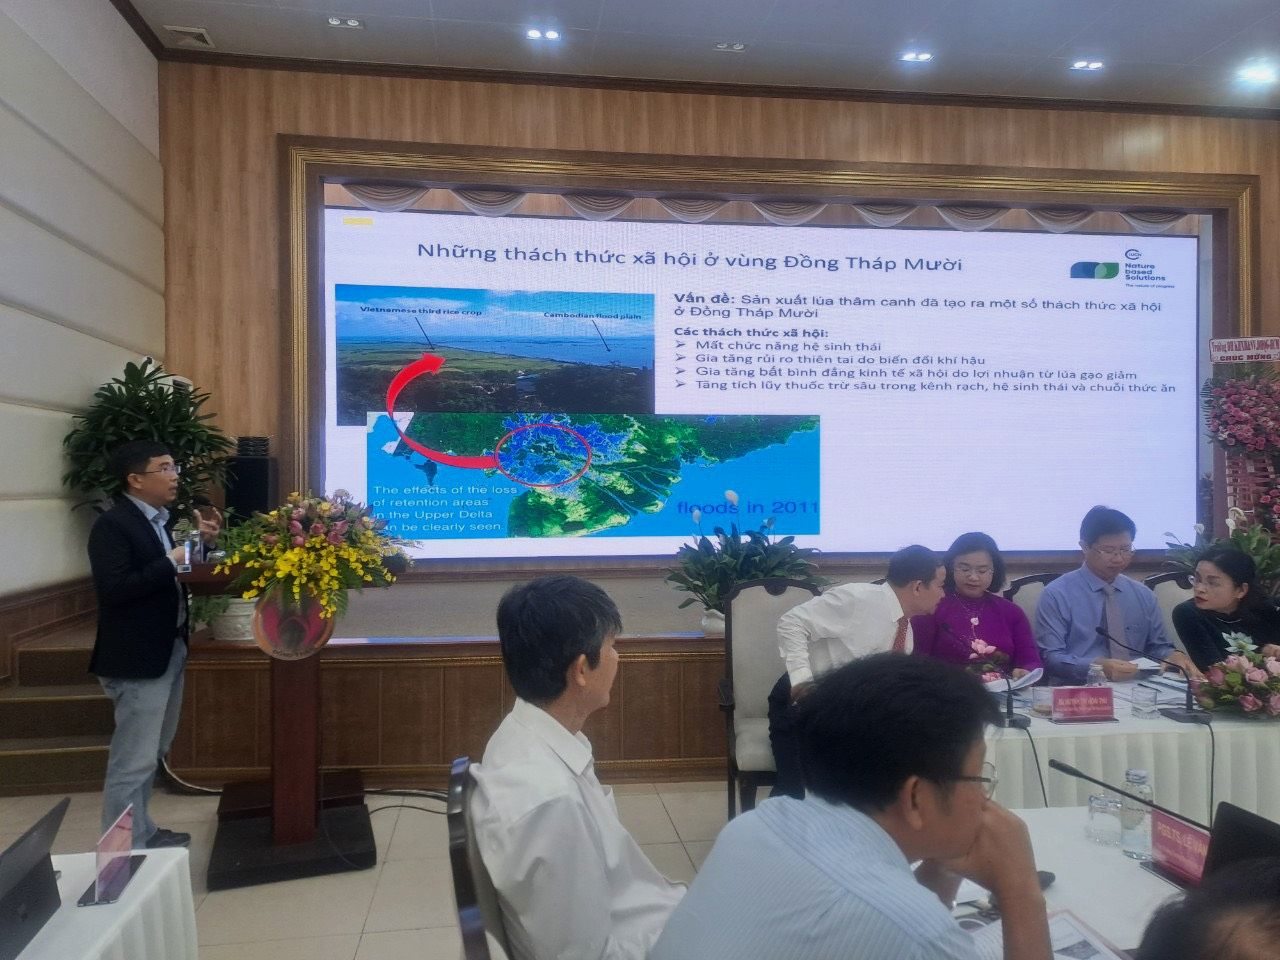 IUCN's representative presented about lotus farms as NbS at workshop organised by Dong Thap PPC 